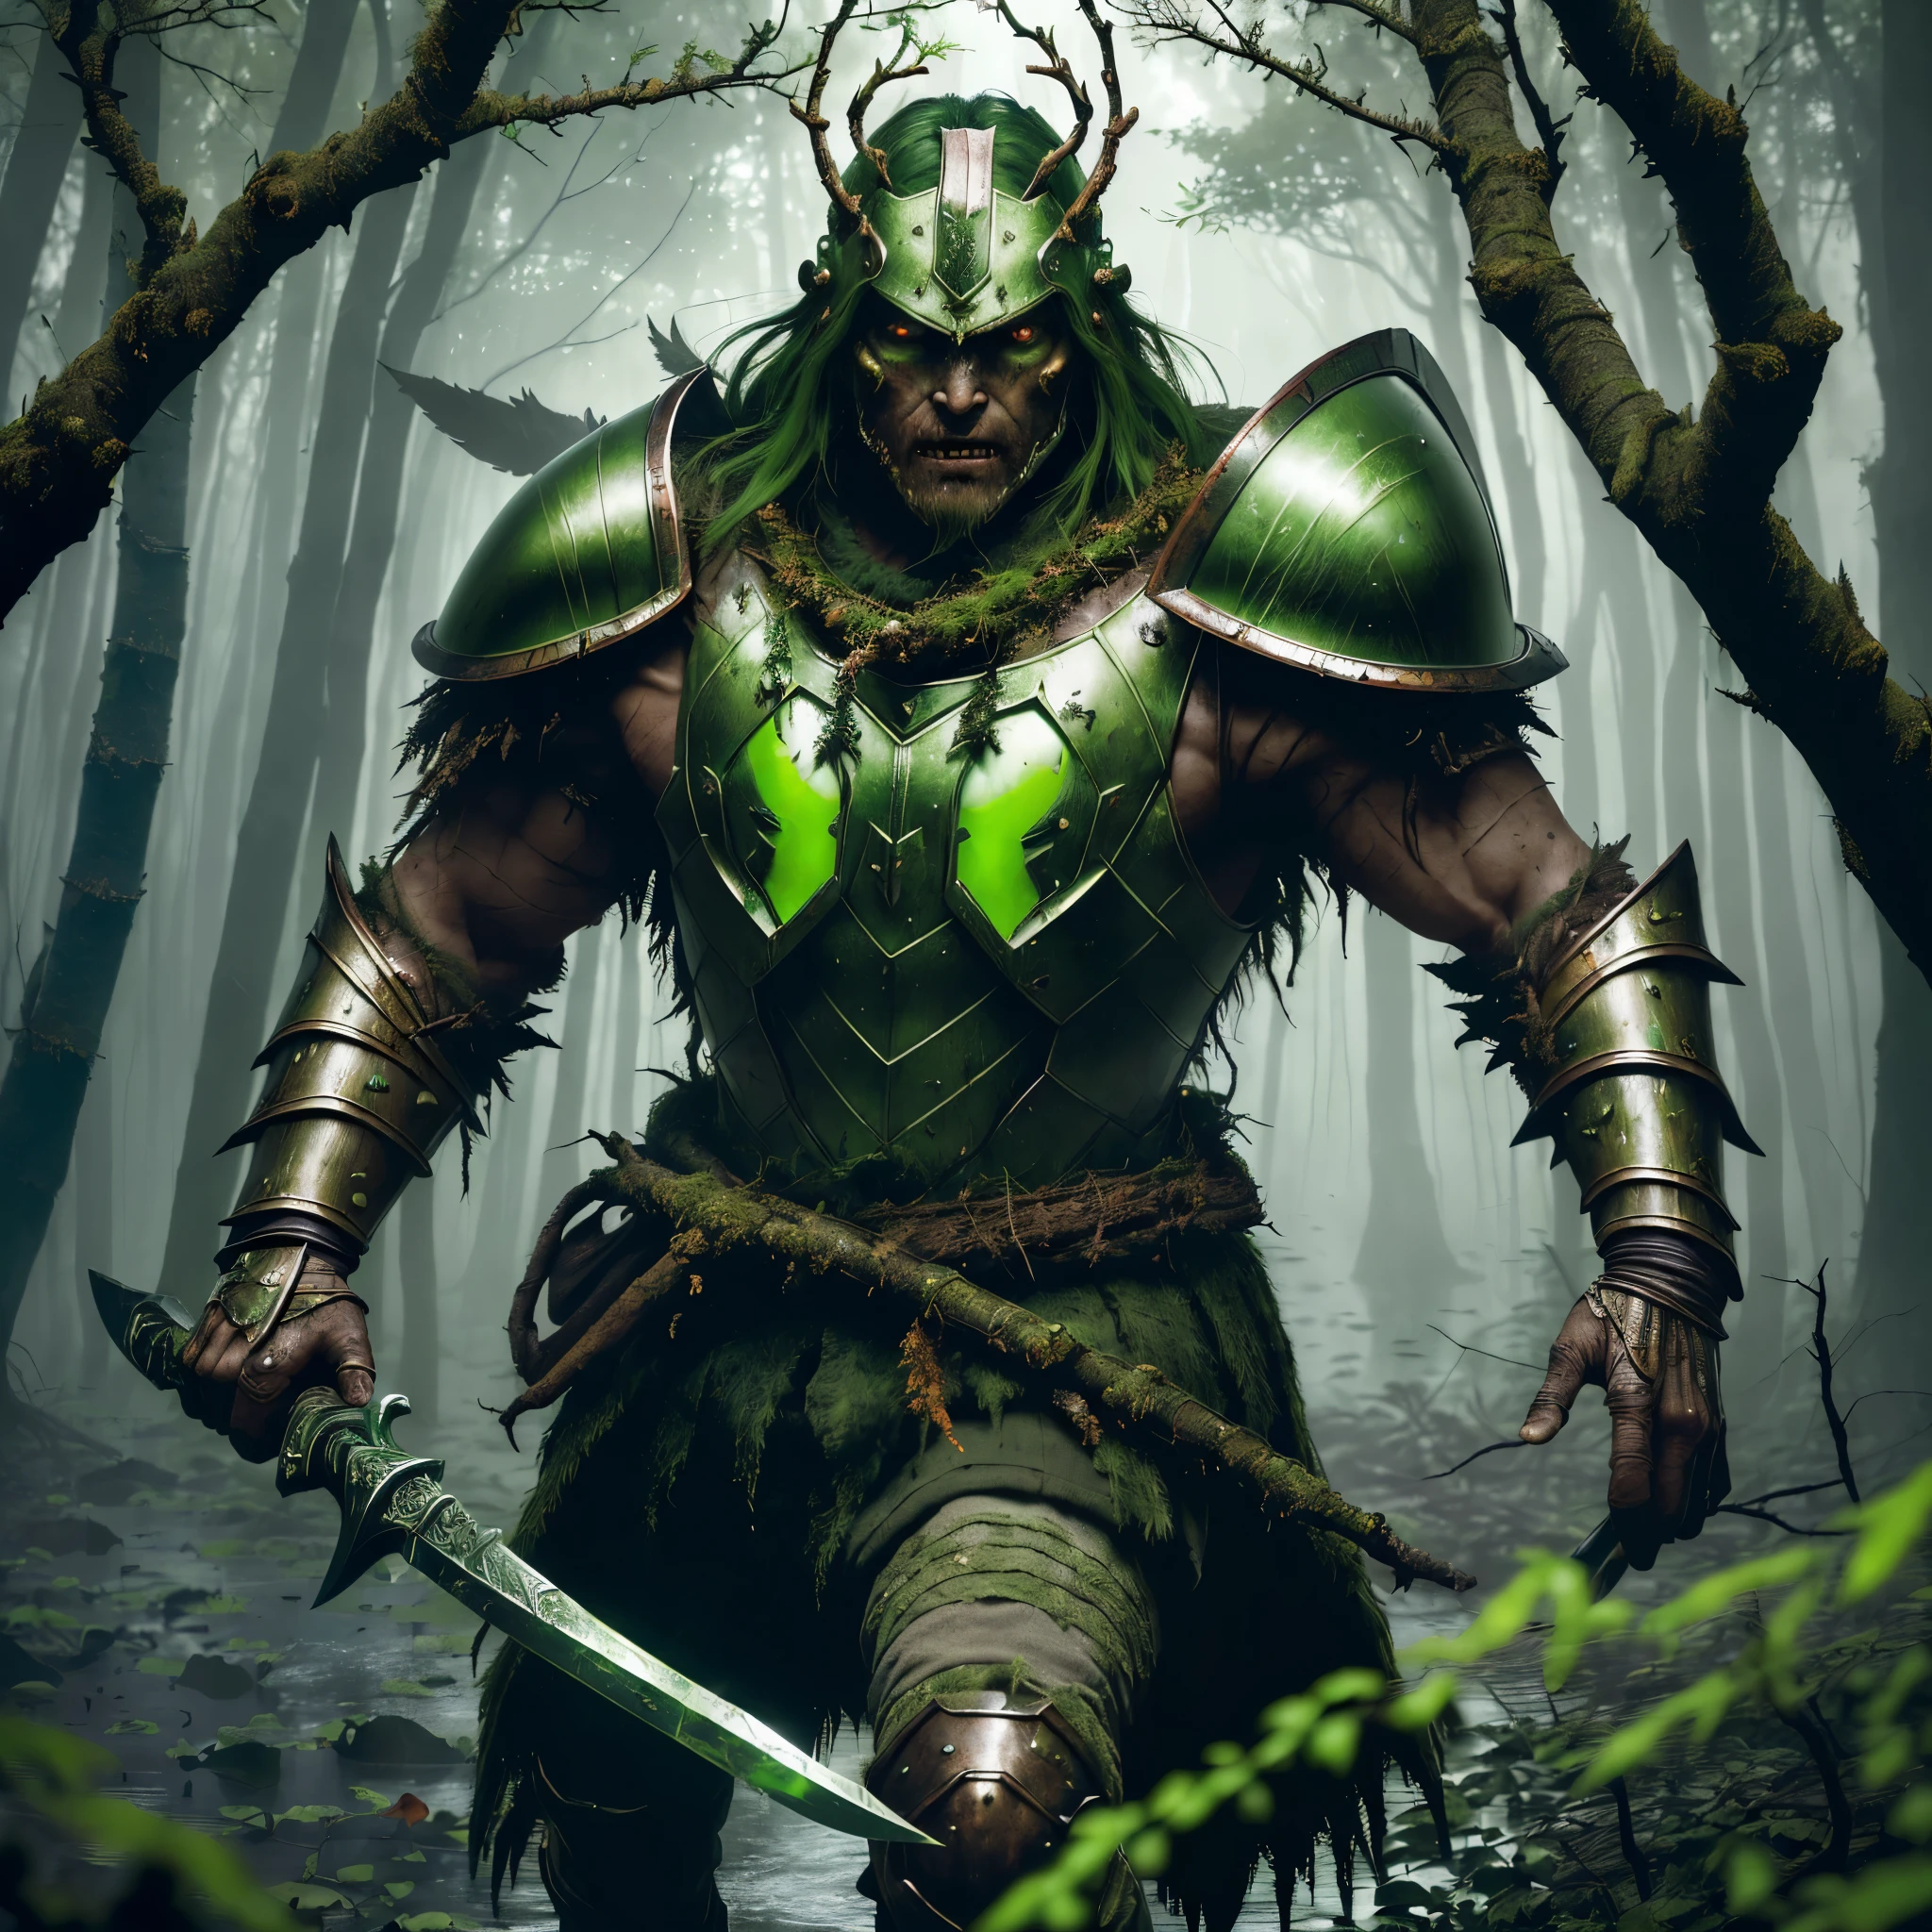 (Best Quality, 8K, Masterpiece, Ultra HD: 1.3, Huge detail, 35mm, sharp, hyper realistic, epic scale, insane level of details, very detailed eyes and face, detailed eyes), (half-light, twilight, misty swamp forest), (anthropomorphic male draugr walking through a mystical swampy forest at distance), ((old rusty double blade battle axe in hands, round shield made of branches, armor and helmet made of branches and bark)), (dark green hair, brown skin, green glowing eyes with green smoke emanates, anthropomorphic face)